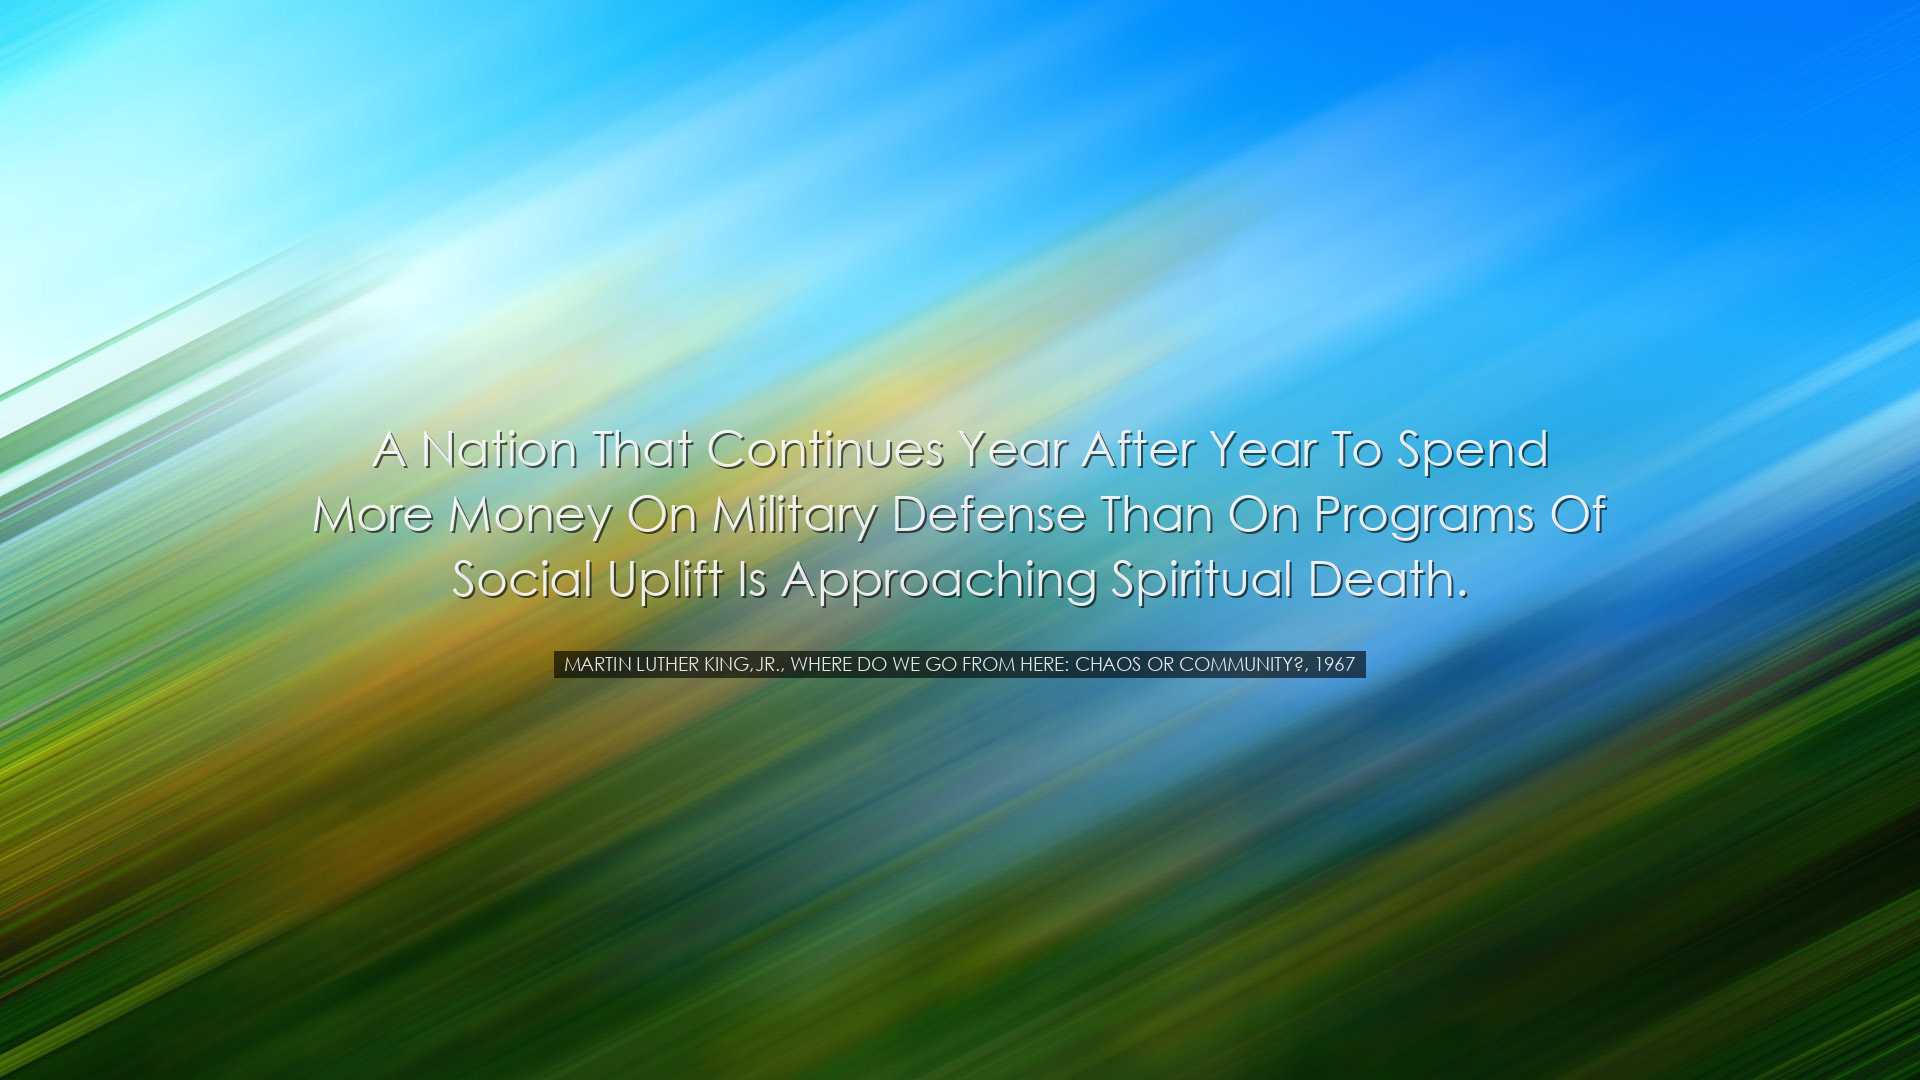 A nation that continues year after year to spend more money on mil